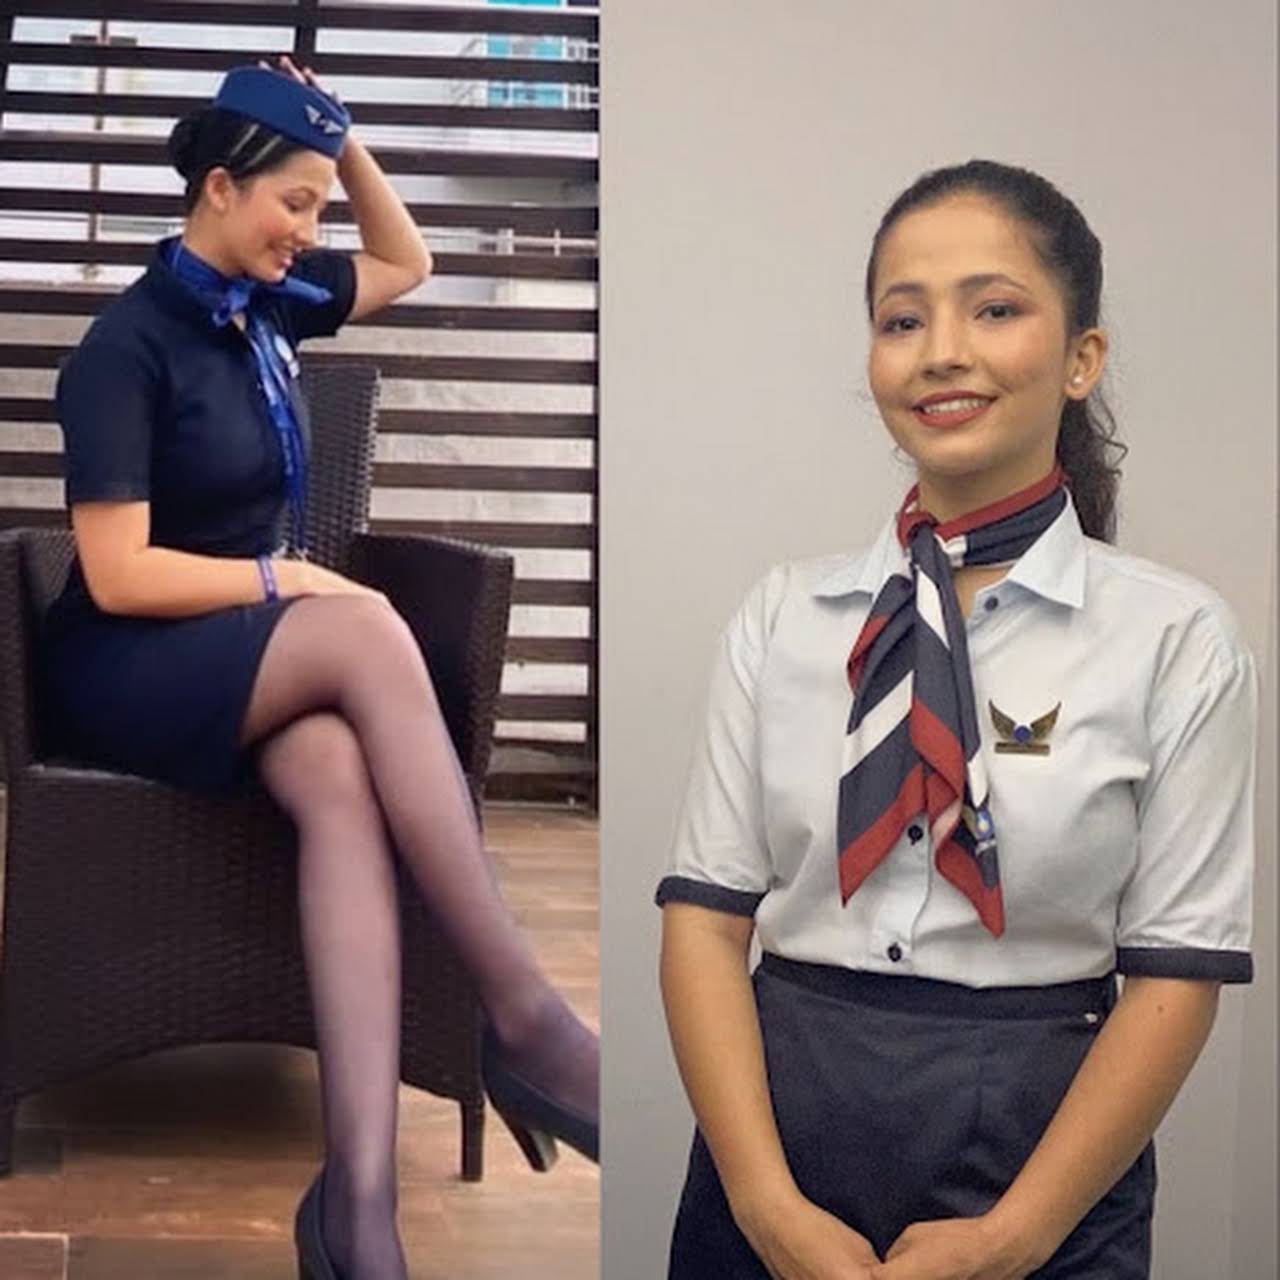 Ambiance Fly student to Indigo Cabin Crew